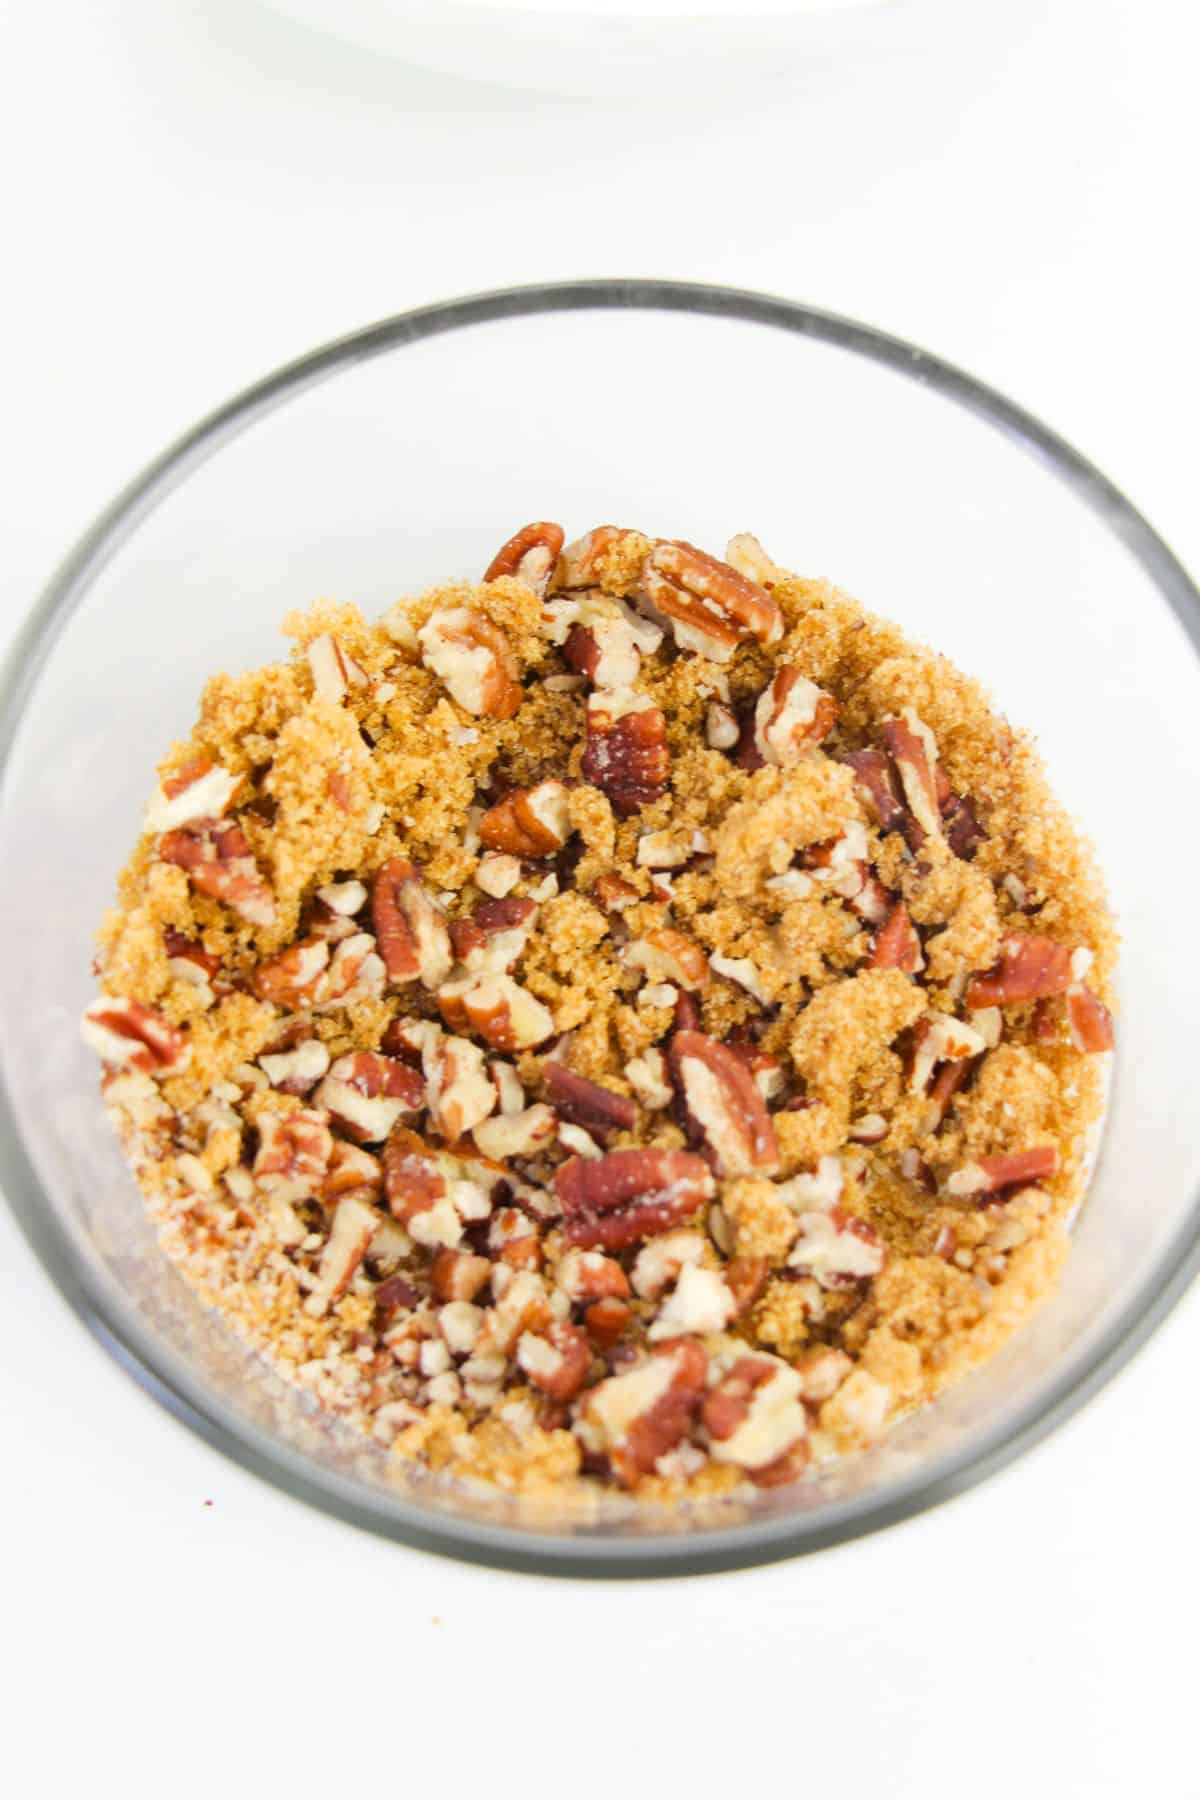 brown sugar and chopped pecans in a mixing bowl.